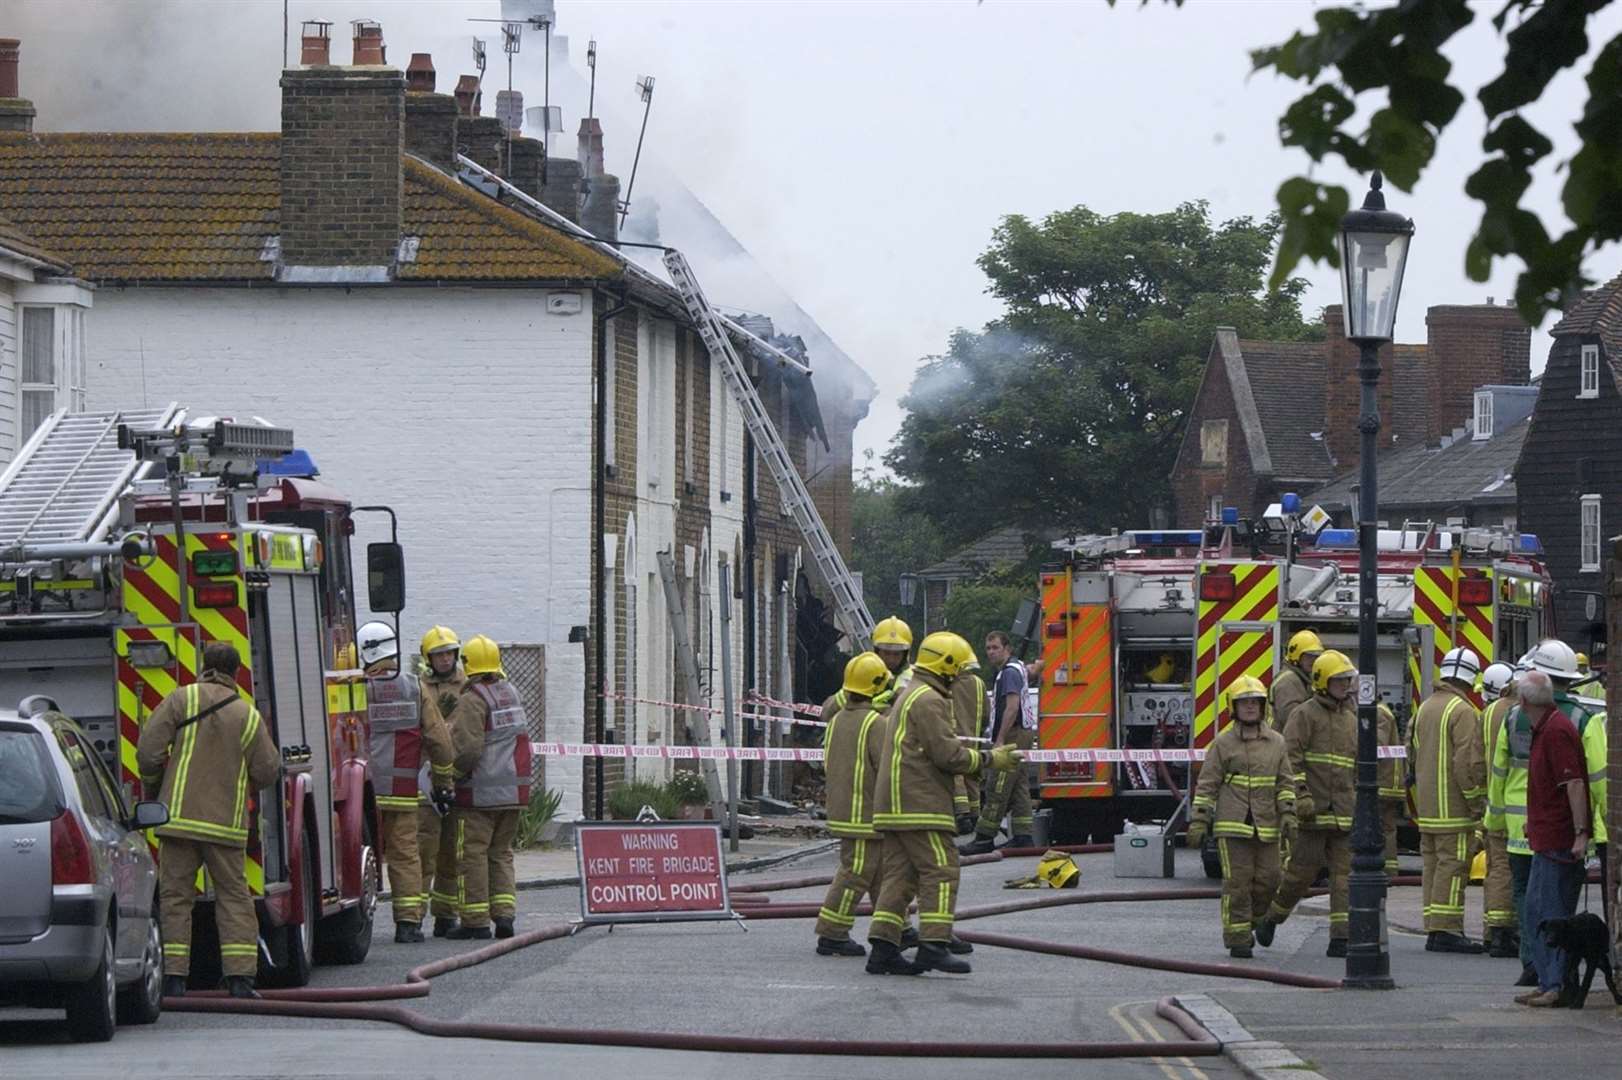 The scene in Abbey Street, Faversham, as Firefighters dealt with the aftermath of the gas explosion